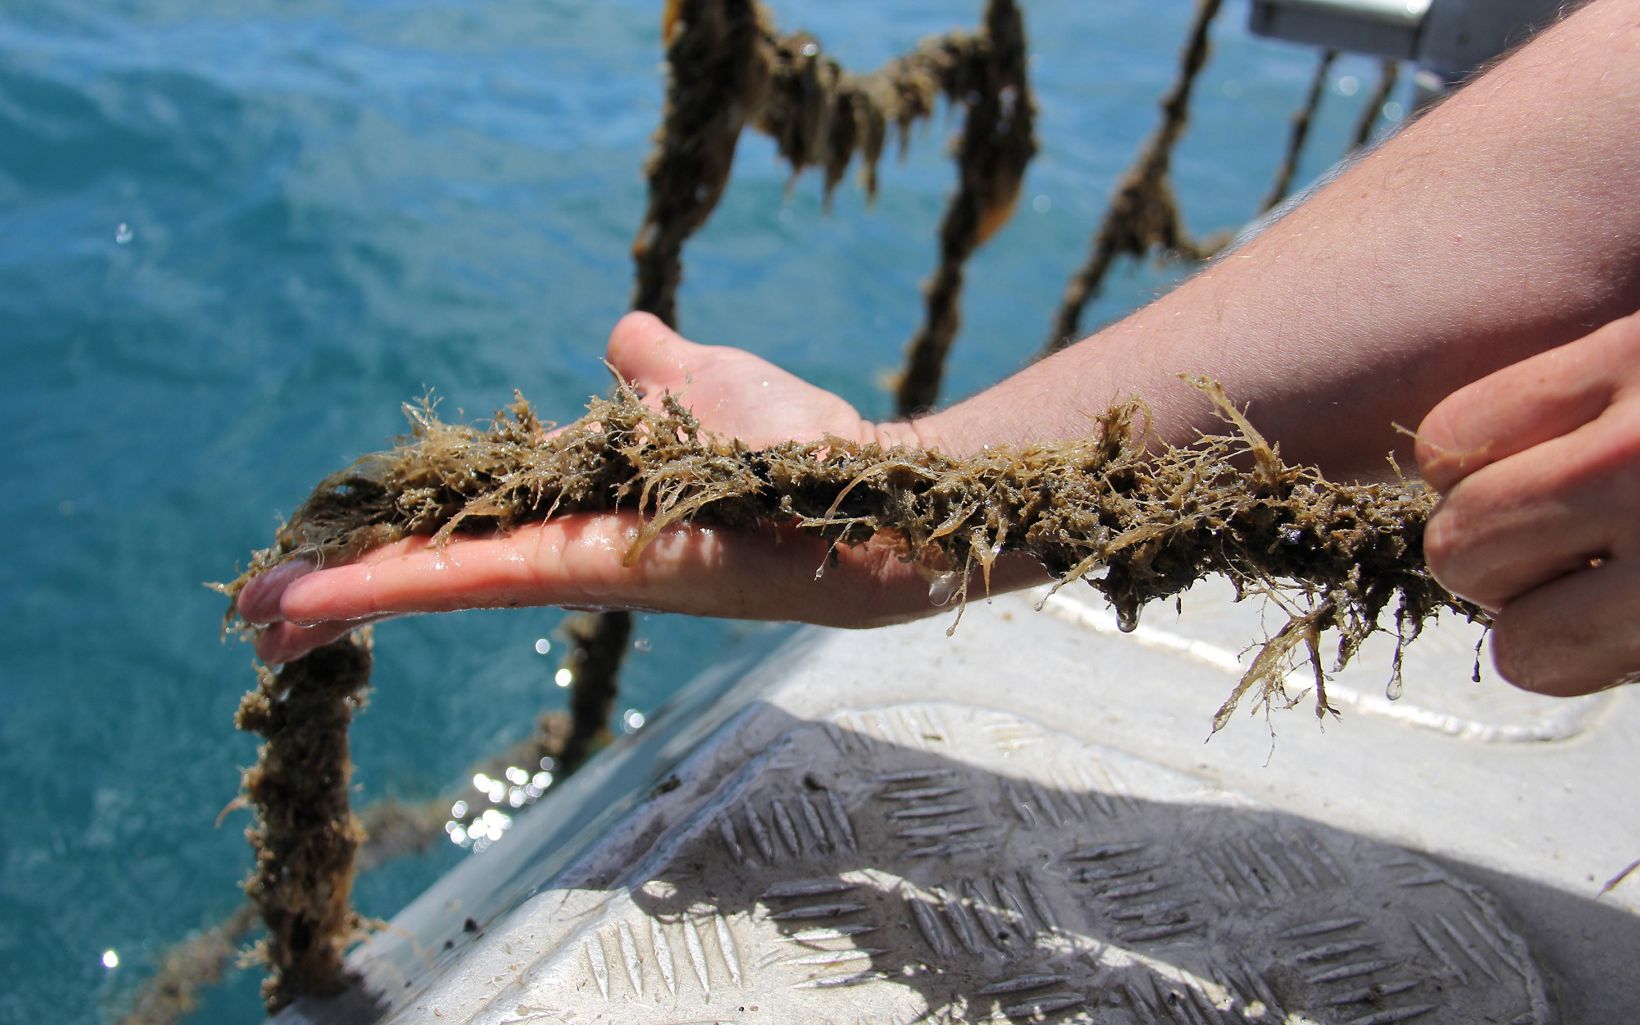 That have been growing on long ropes at a shellfish aquaculture farm